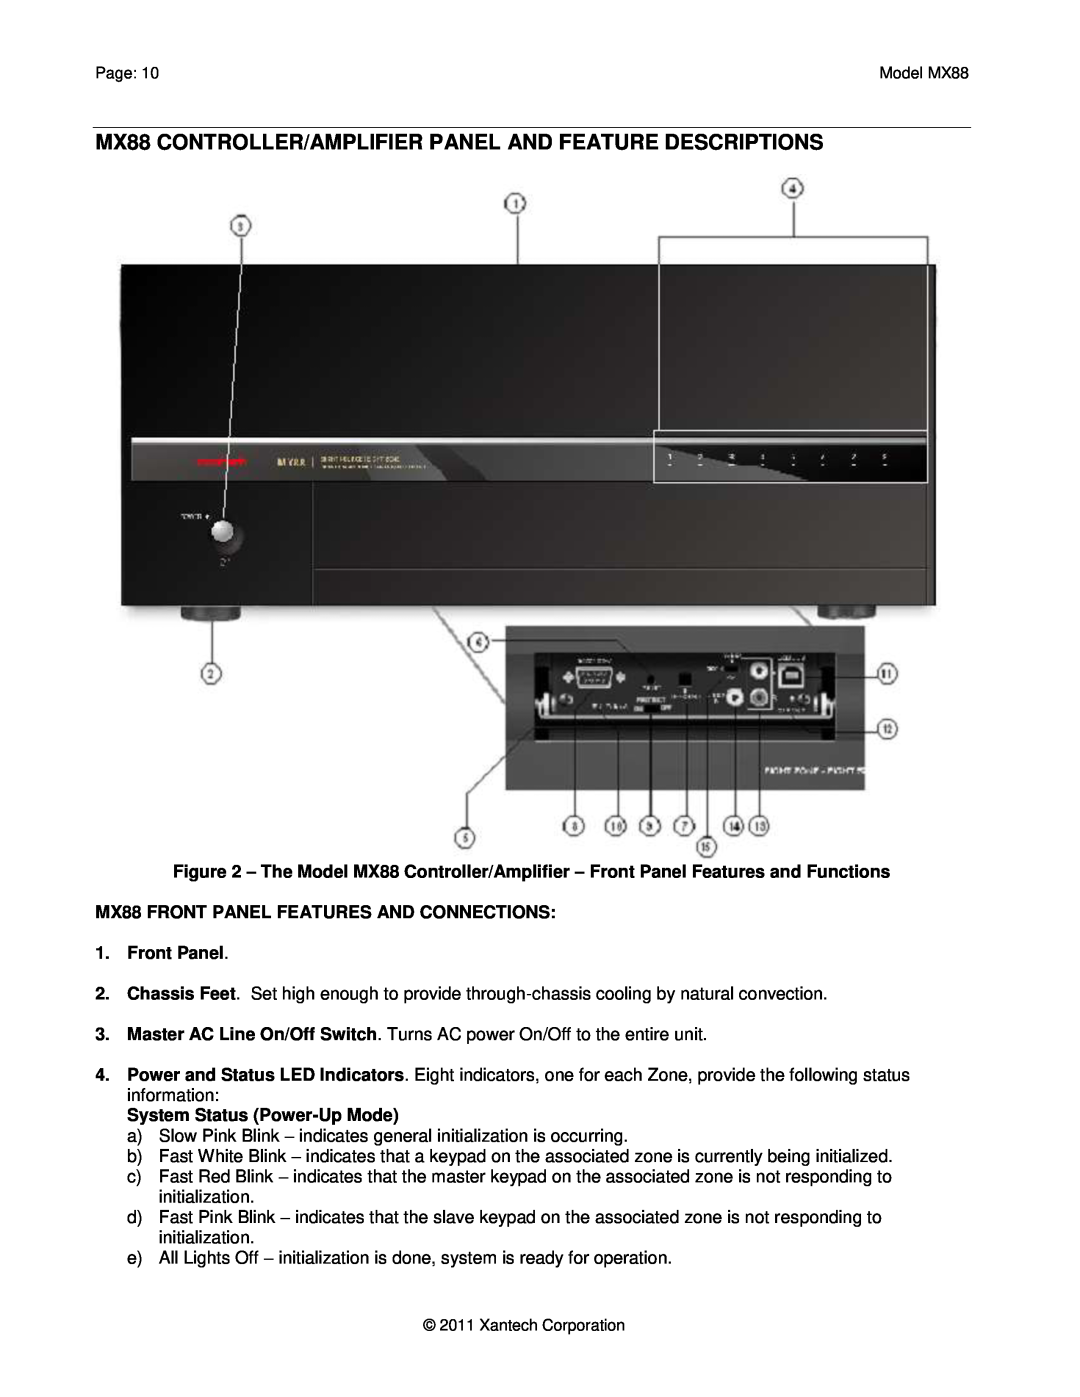 Xantech installation instructions MX88 FRONT PANEL FEATURES AND CONNECTIONS, Front Panel, System Status Power-UpMode 